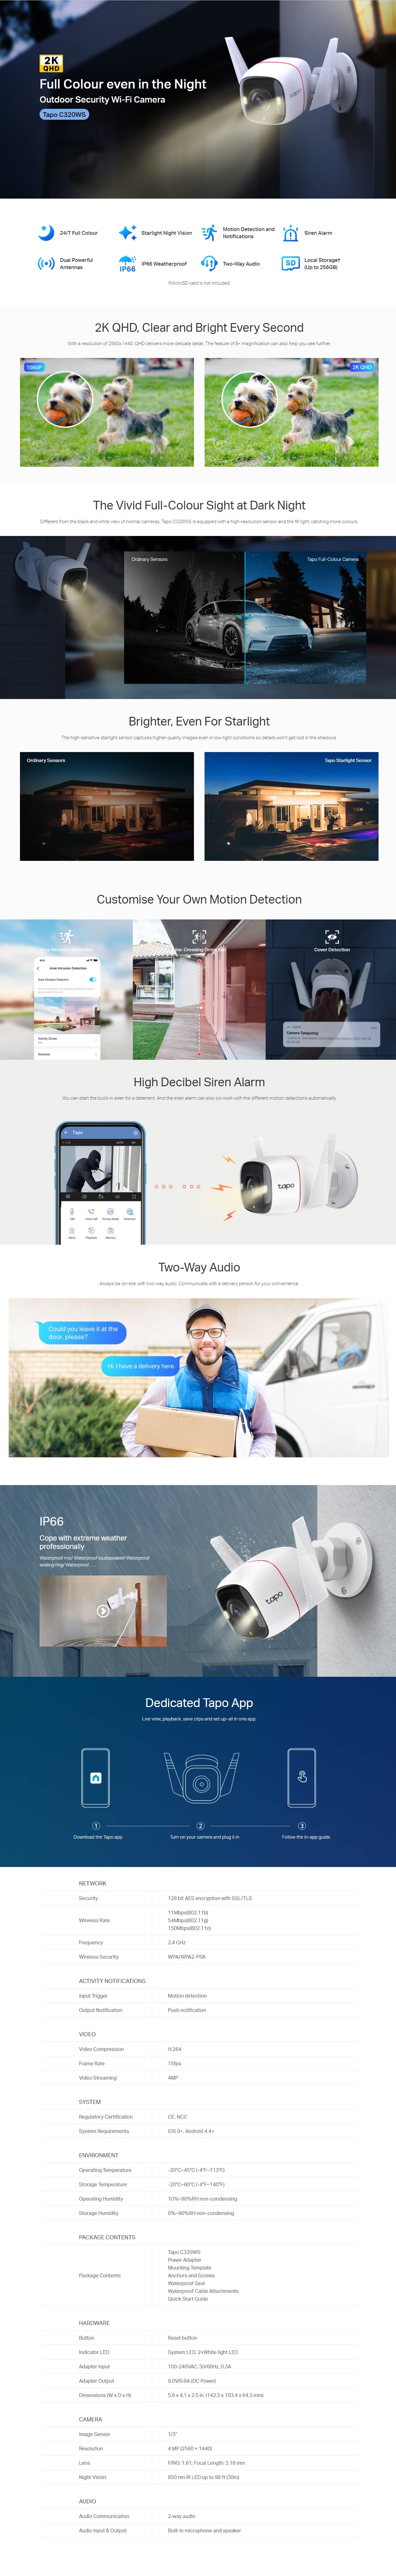 A large marketing image providing additional information about the product TP-Link Tapo C320WS Outdoor Security Wi-Fi Camera - Additional alt info not provided